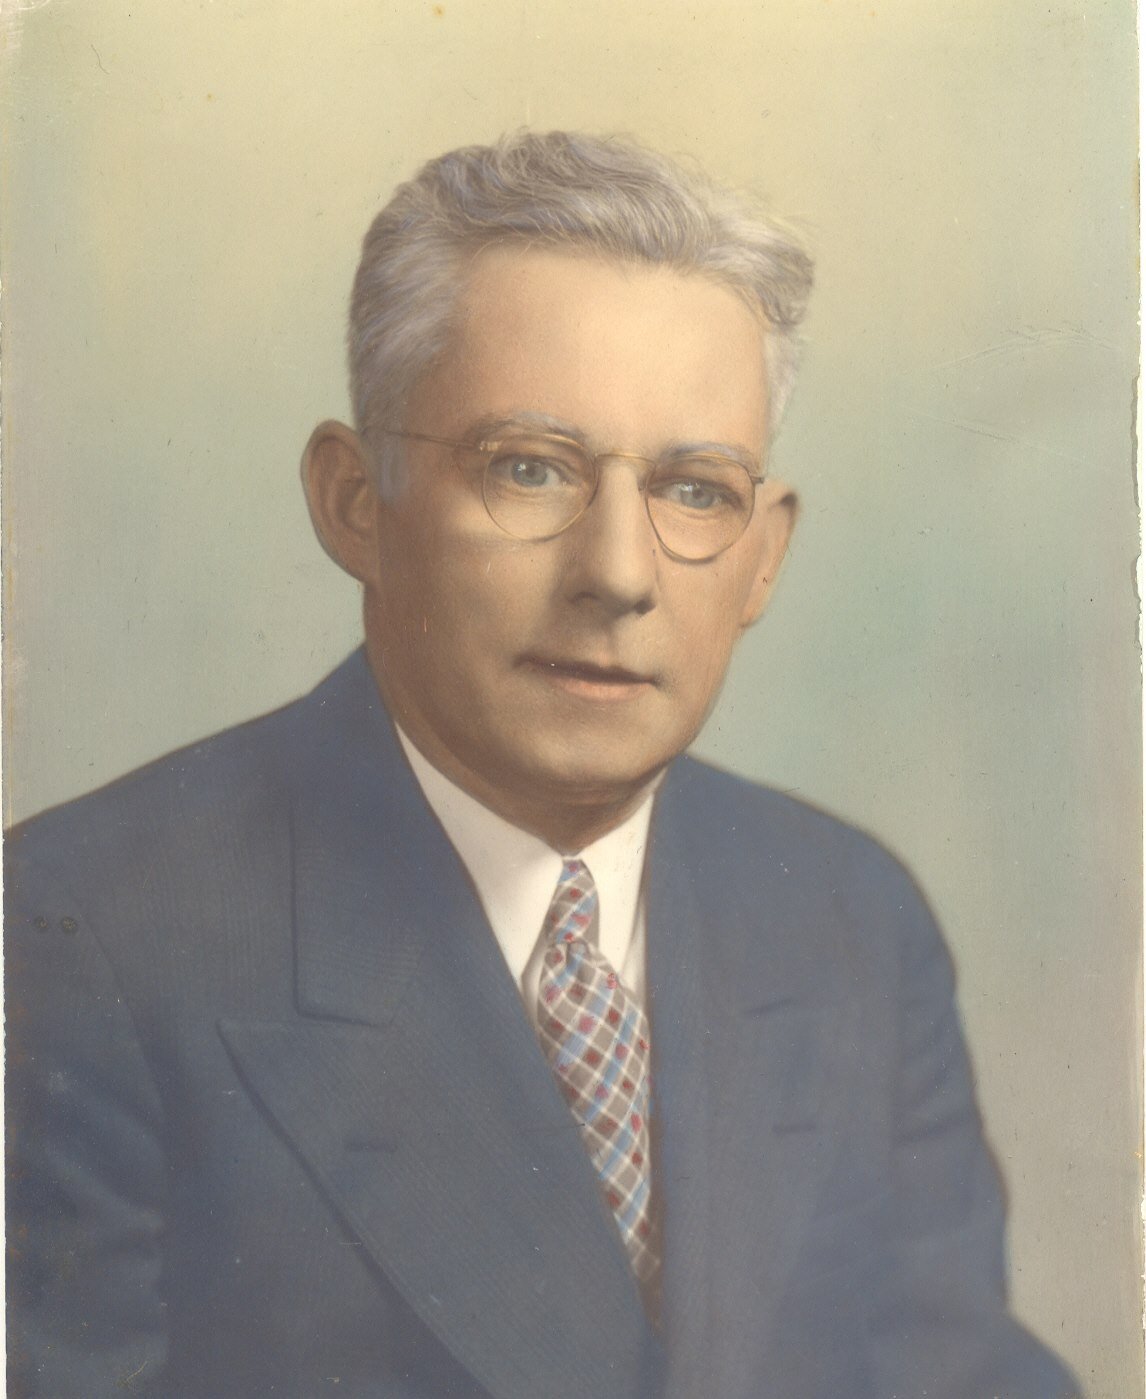 Dr. Frank Dealy